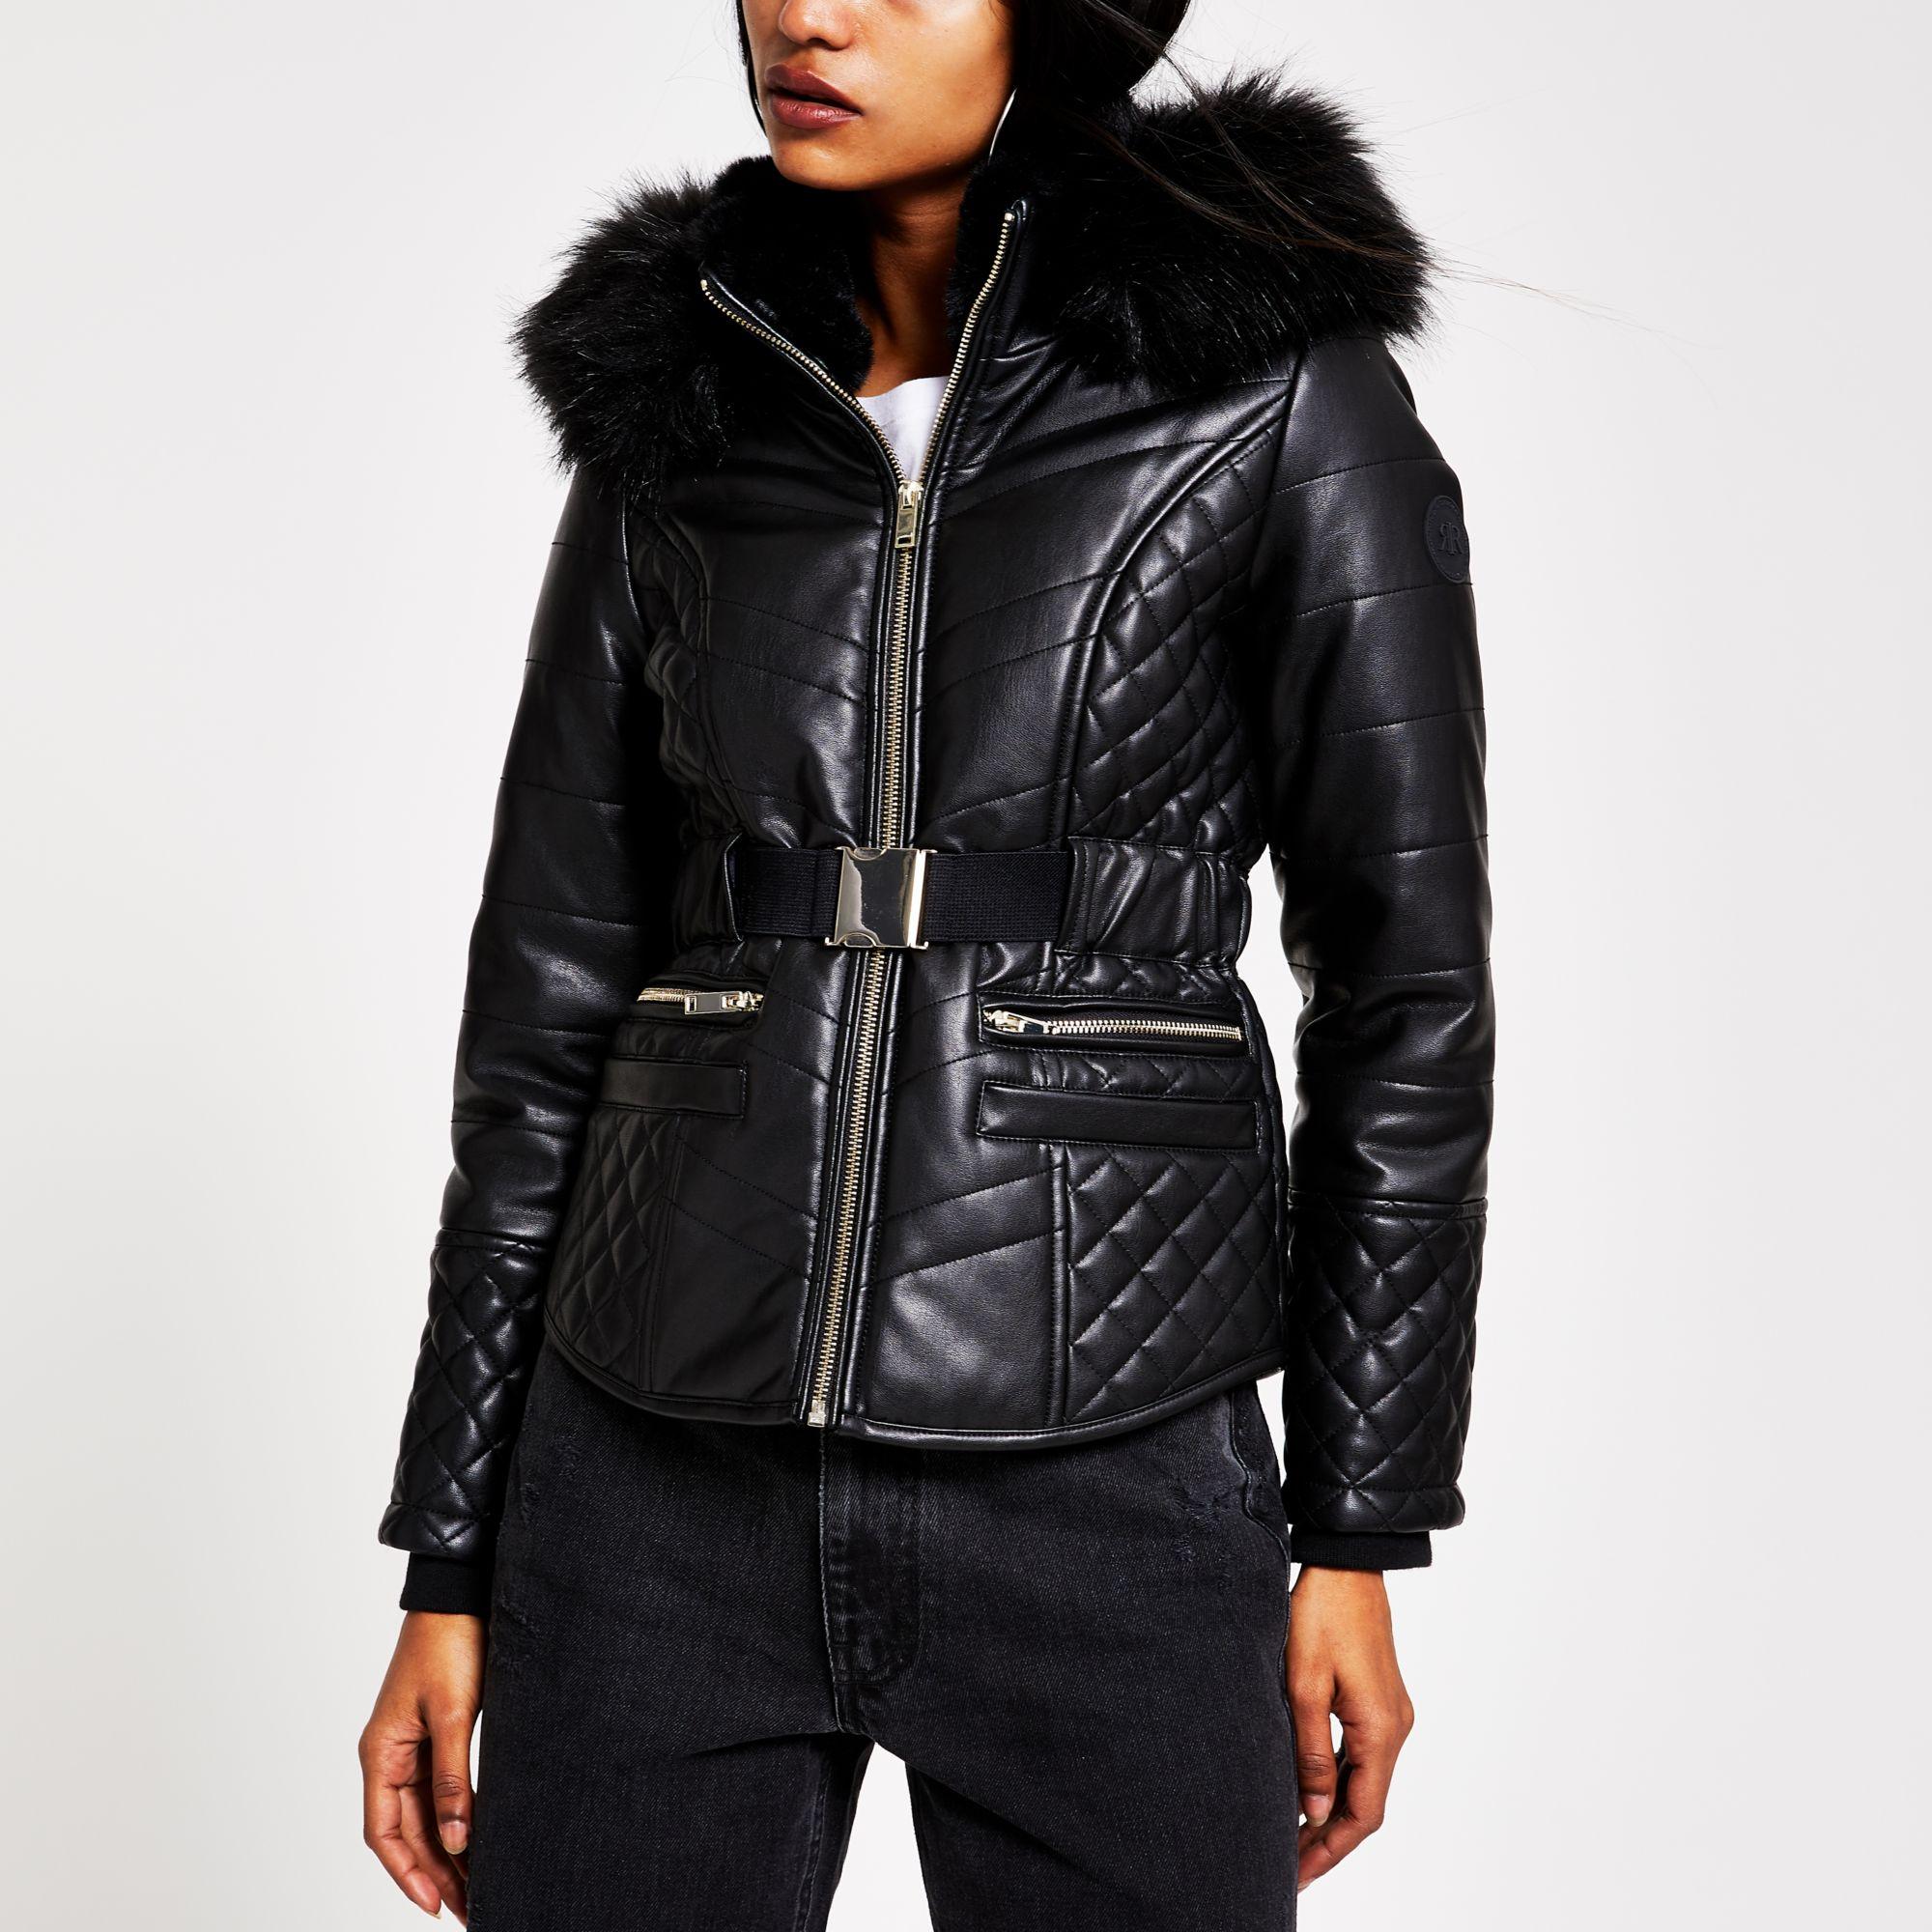 River Island Petite Belted Hooded Puffer Jacket in Black - Lyst